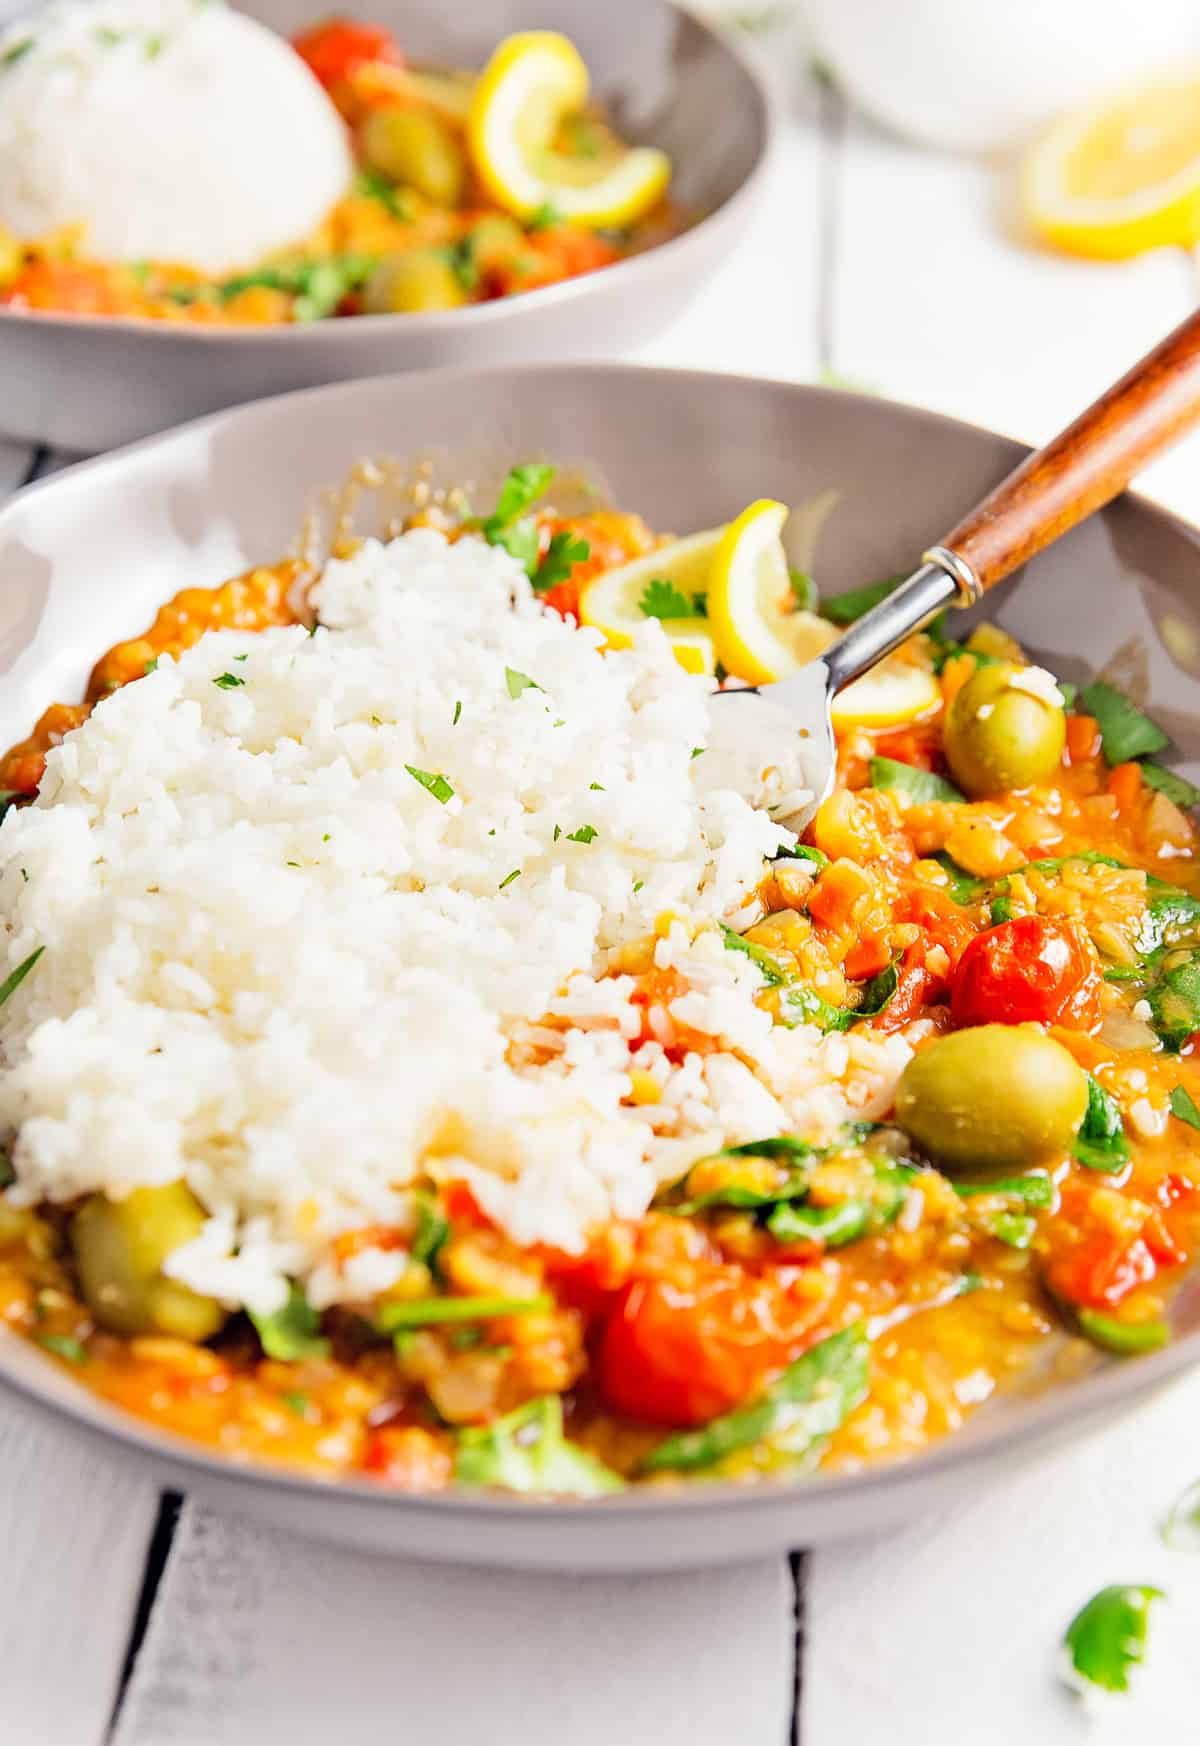 Moroccan Red Lentil Tomato Stew, plant based, vegan, vegetarian, whole food plant based, gluten free, recipe, wfpb, healthy, healthy vegan, oil free, no refined sugar, no oil, refined sugar free, dairy free, dinner party, entertaining, stew